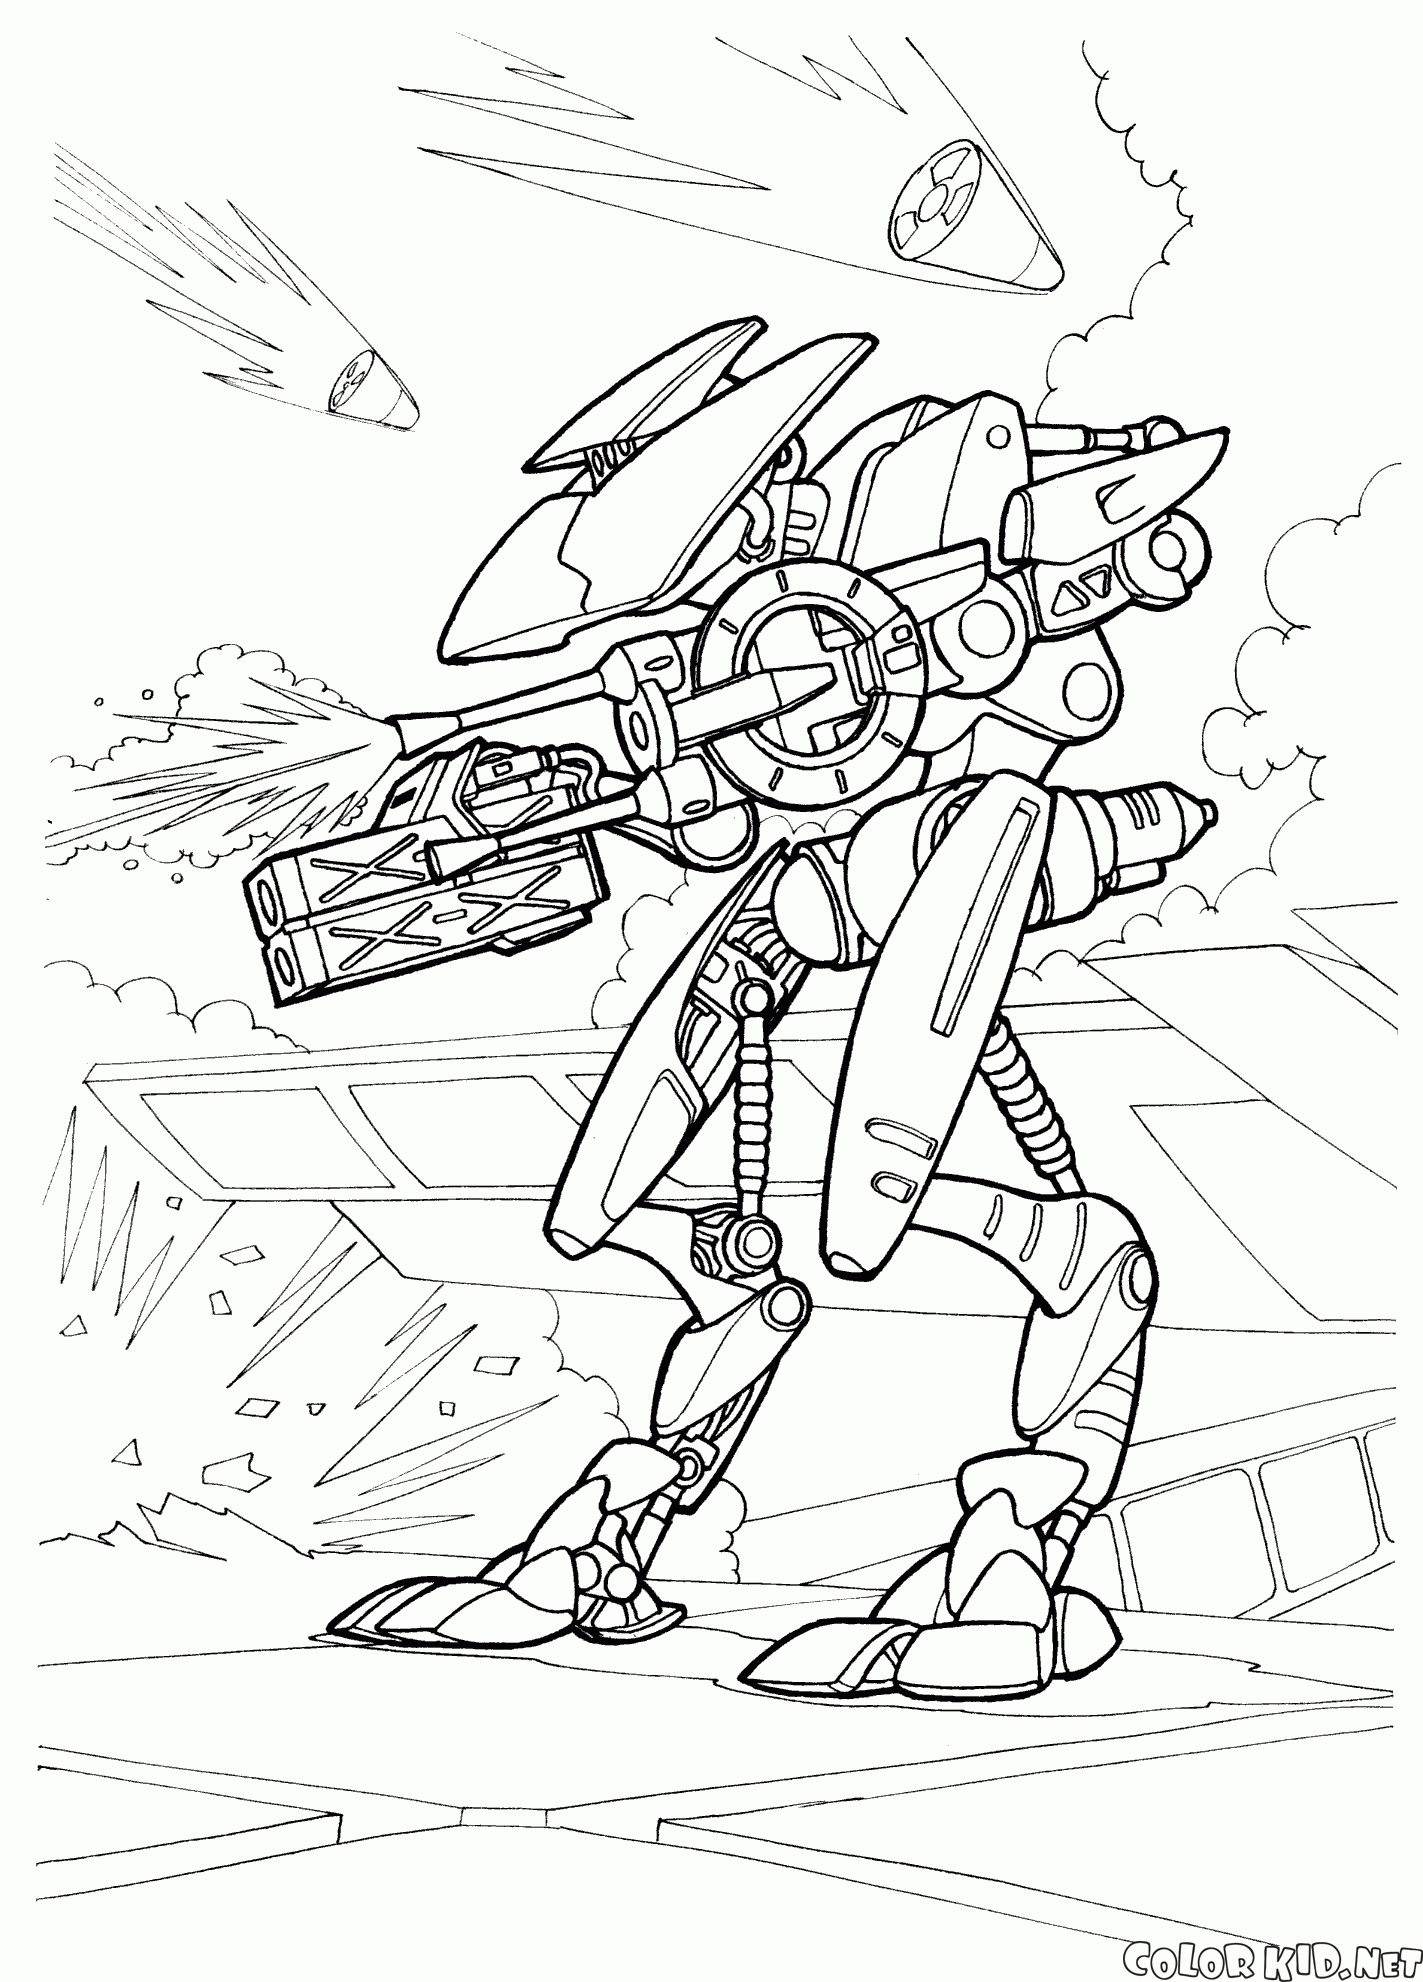 Walking War Robots Coloring Pages Coloring Pages